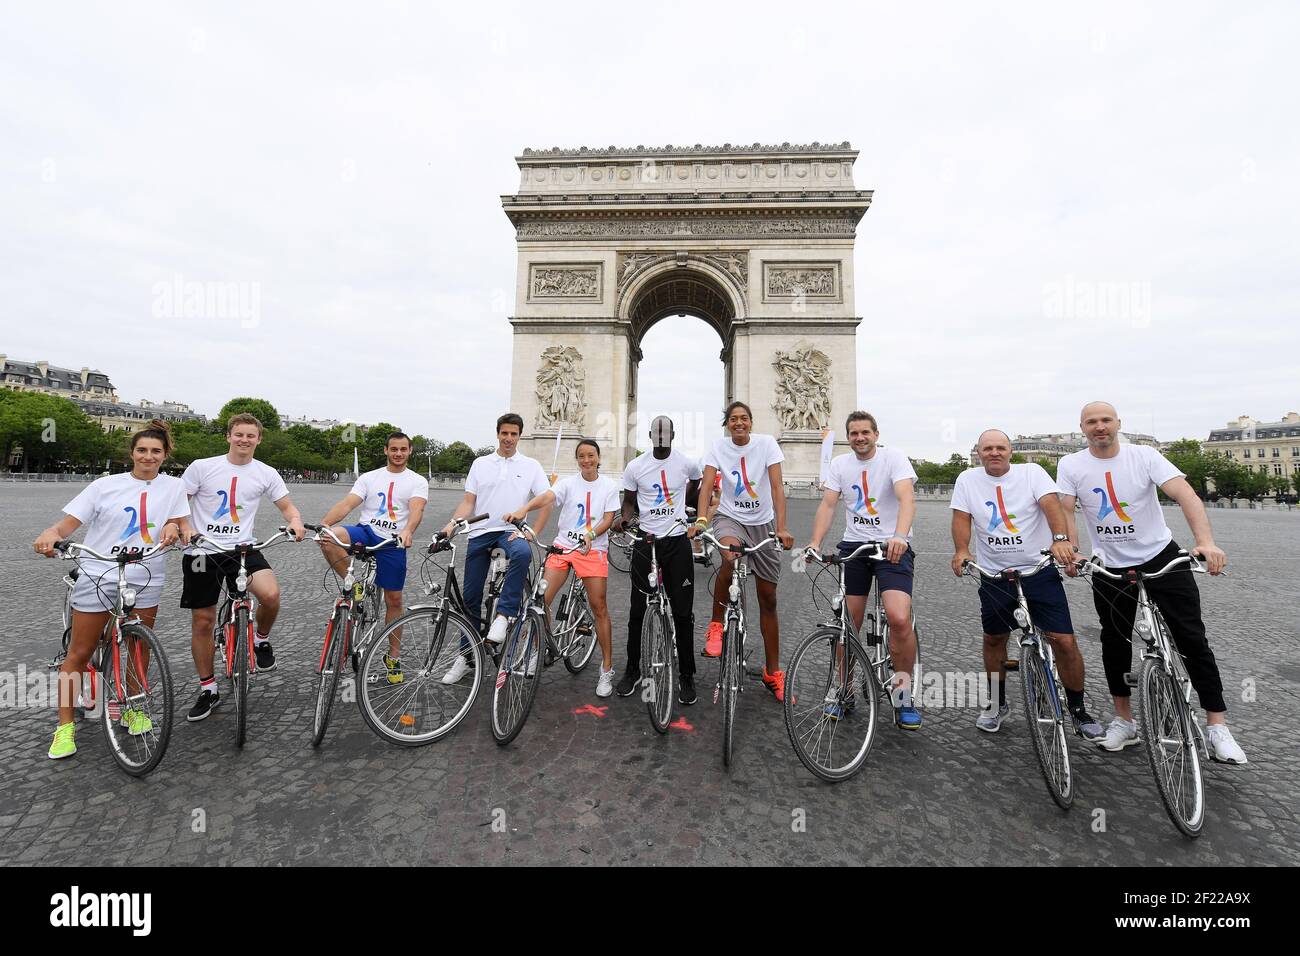 Perrine Laffont, Benjamin Cavet, Samir Ait Said, Co-president of Paris 2024 candidacy Tony Estanguet, Hongyan Pi, Leslie Djhone, Emmeline Ndongue, Guillaume Gilles, Thomas Levet and Thierry Omeyer perform during the Olympics days for Paris 2024 Candidacy, in Saint-Denis, France, on June 24, 2017 - Photo Philippe Millereau / KMSP / DPPI Stock Photo